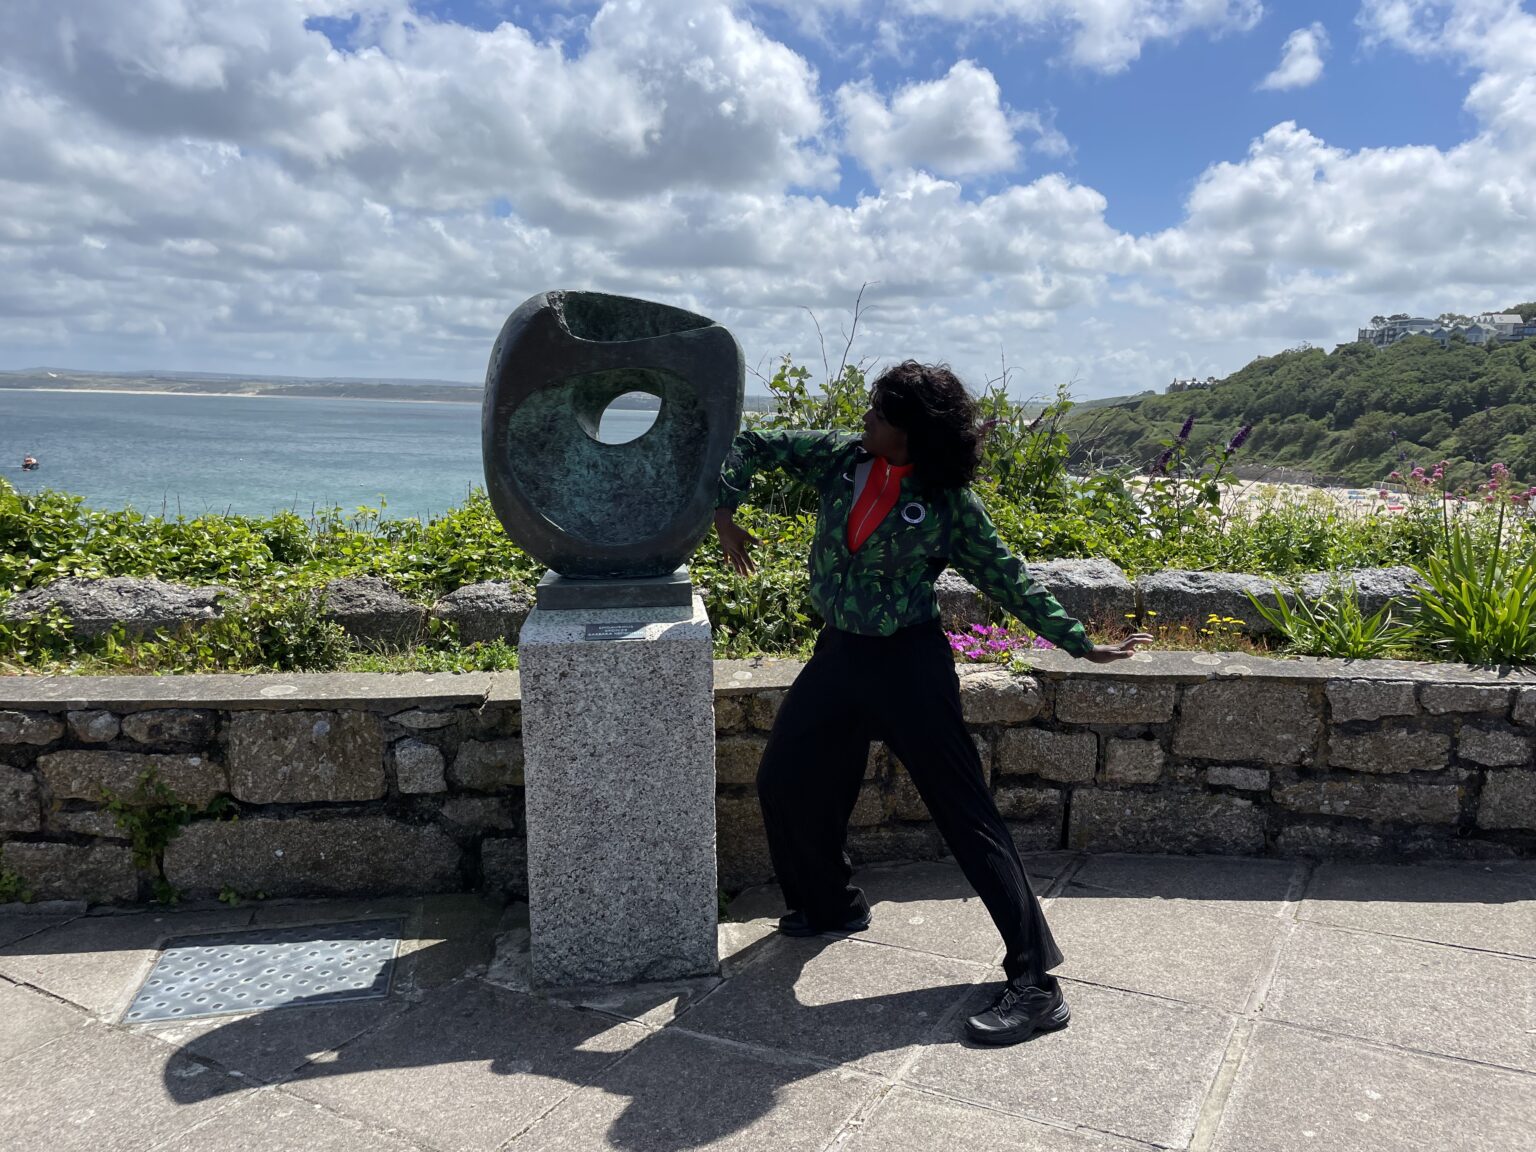 The artist stands beside a sculpture by Barbara Hepworth on a plinth, lifting her arm to touch it with her elbow; behind a coastal landscape on a sunny day..